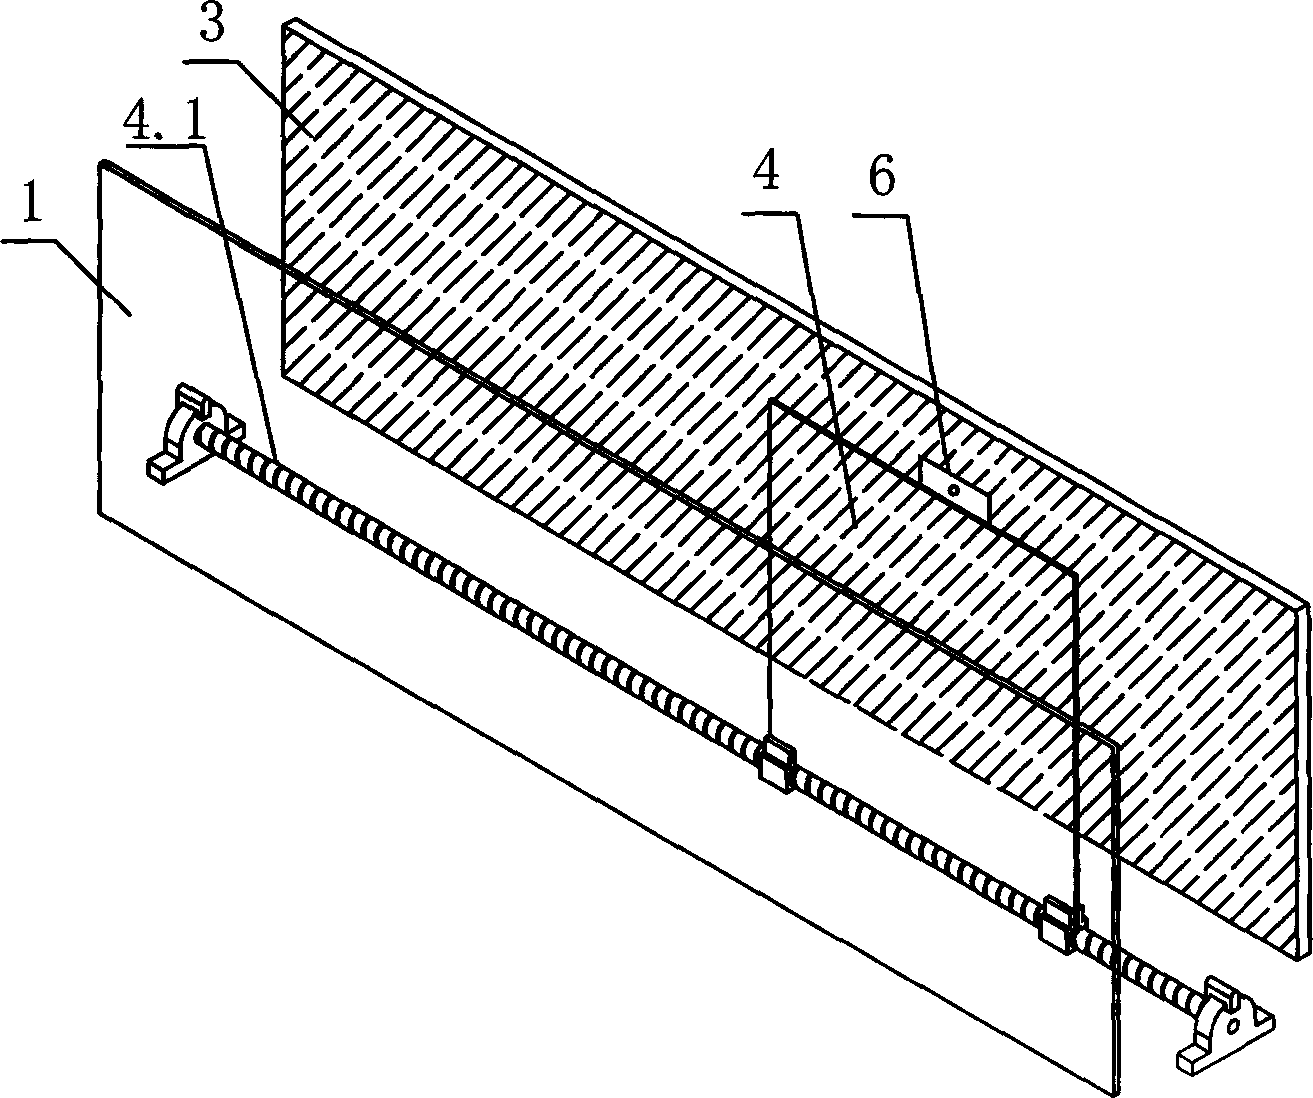 Control method of teaching blackboard writing projection system